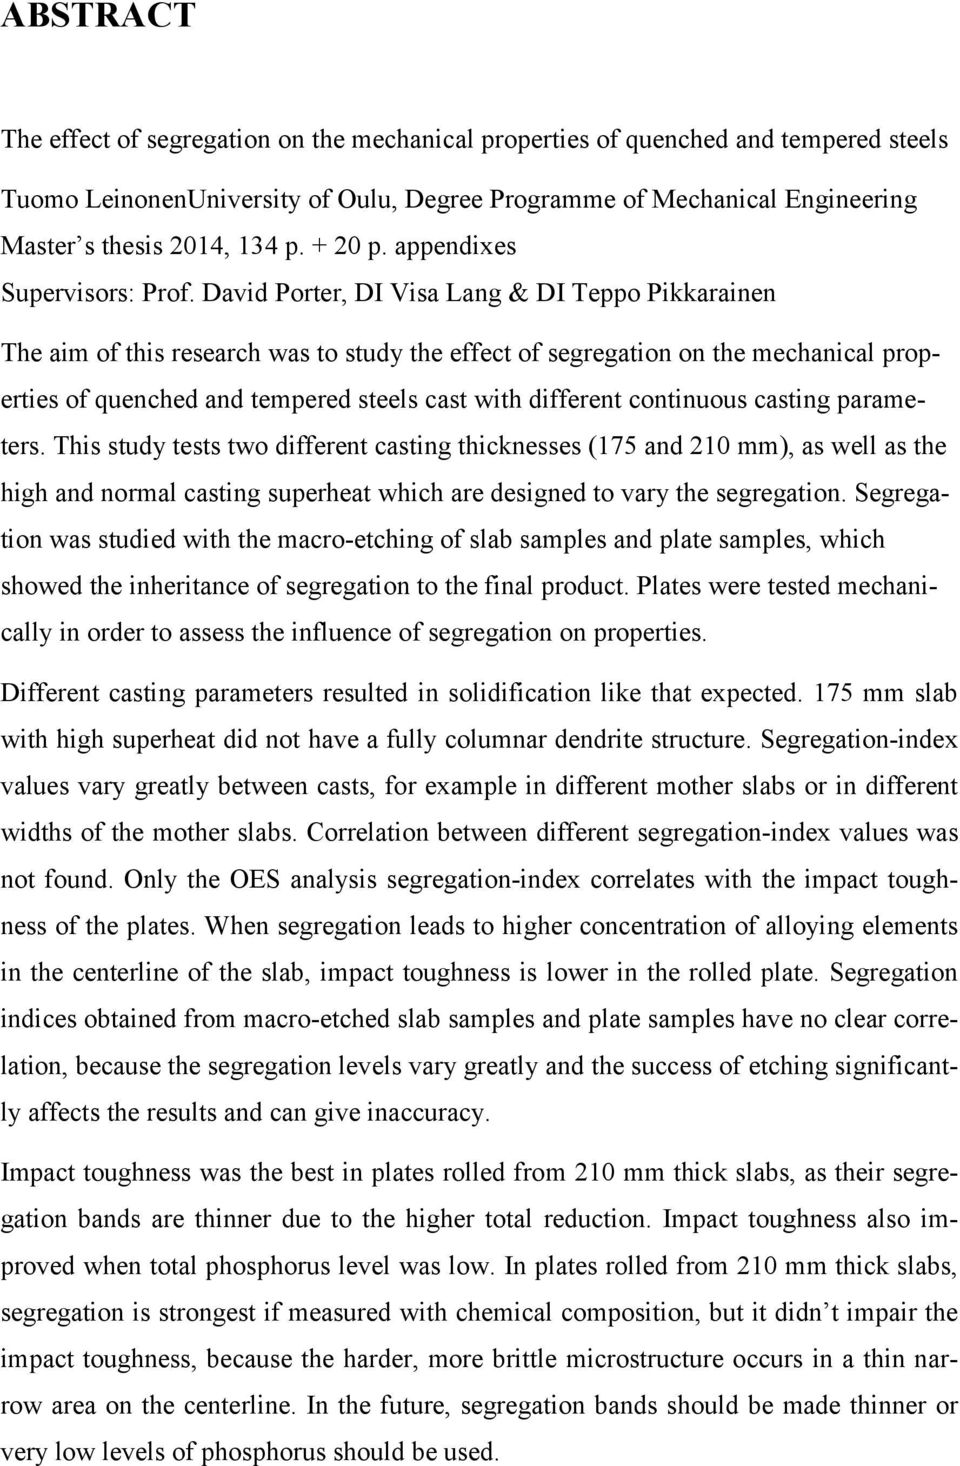 David Porter, DI Visa Lang & DI Teppo Pikkarainen The aim of this research was to study the effect of segregation on the mechanical properties of quenched and tempered steels cast with different